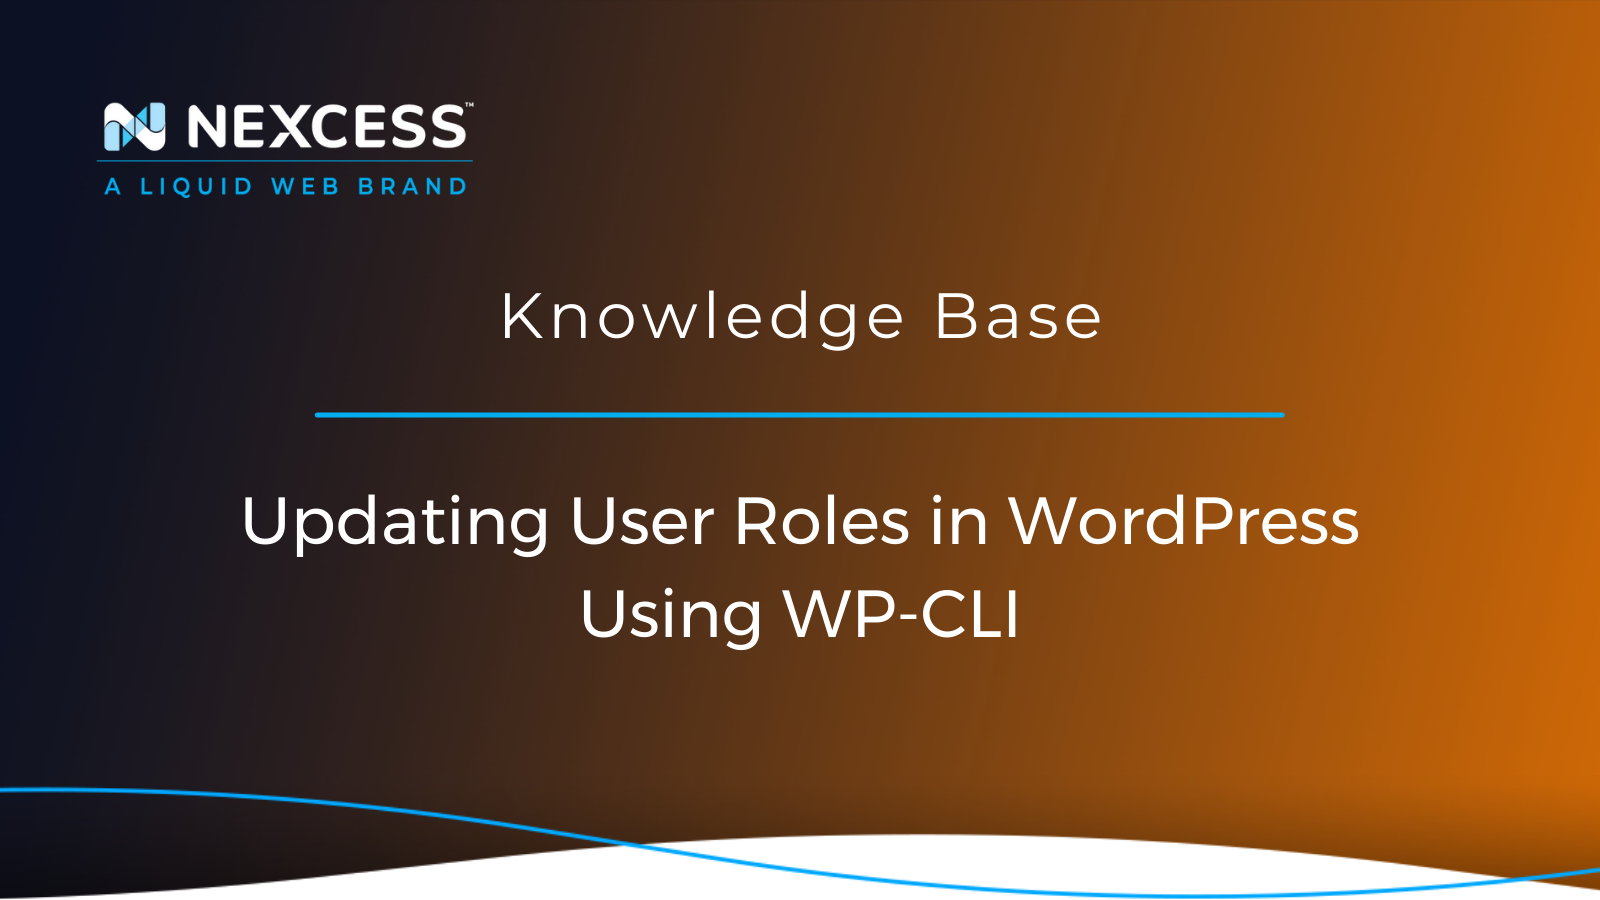 Updating User Roles in WordPress Using WP-CLI